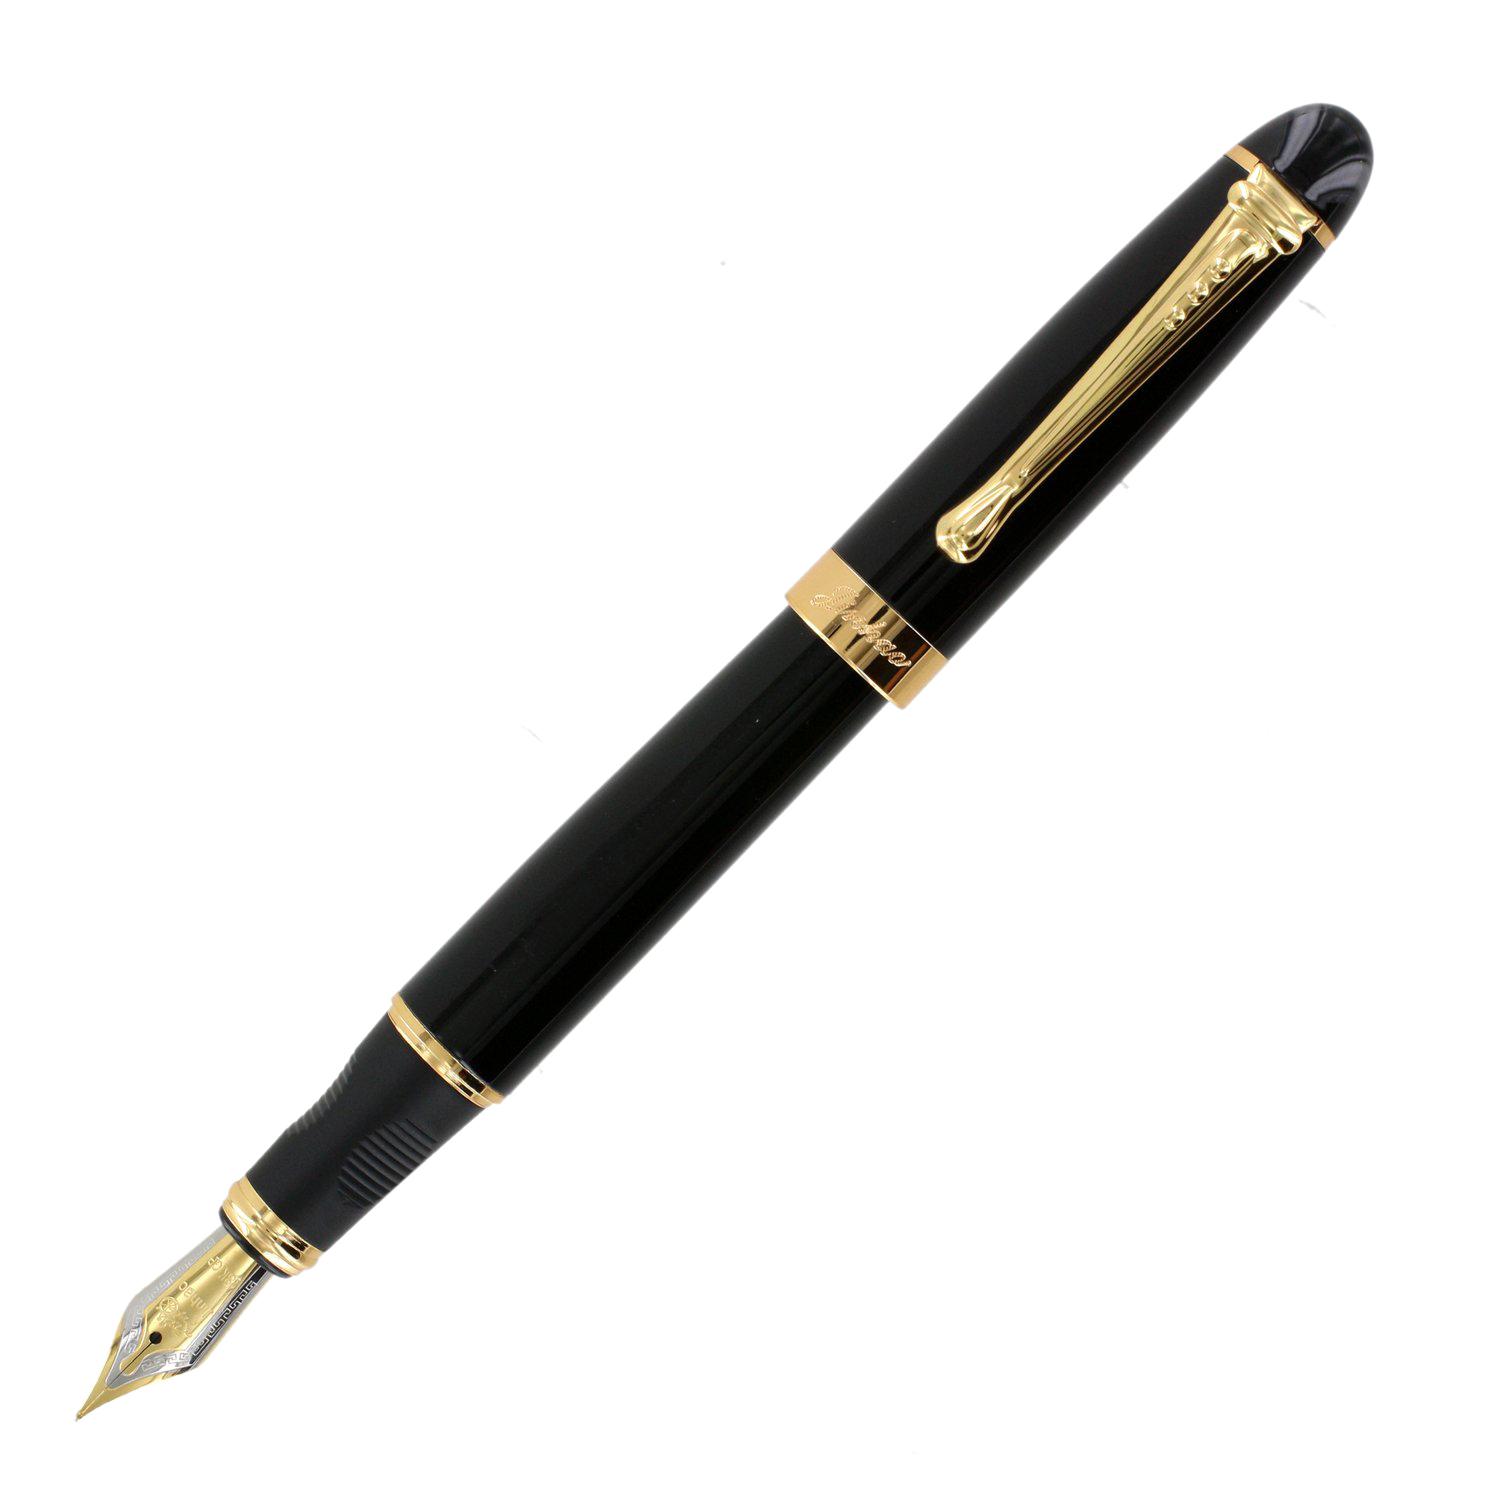 Jinhao Fountain Pen 450 black with gold broad nib